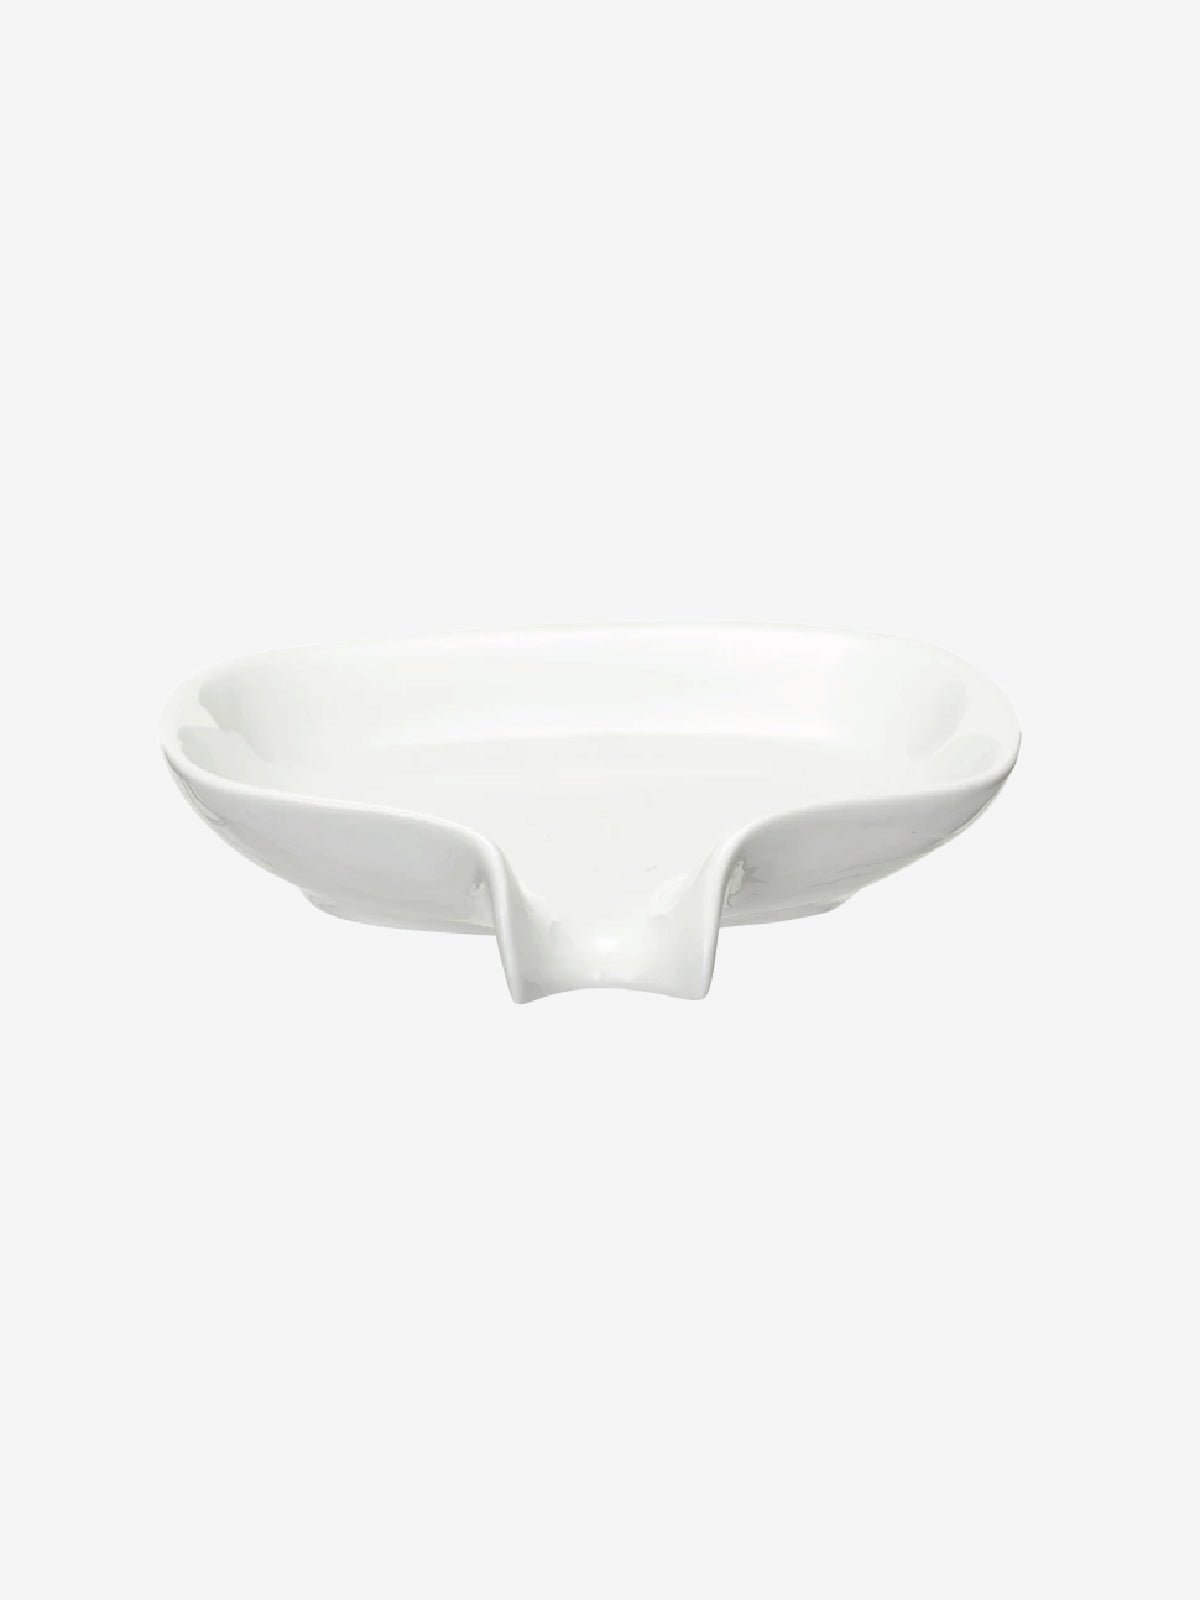 Soap Dish With Drip Spout